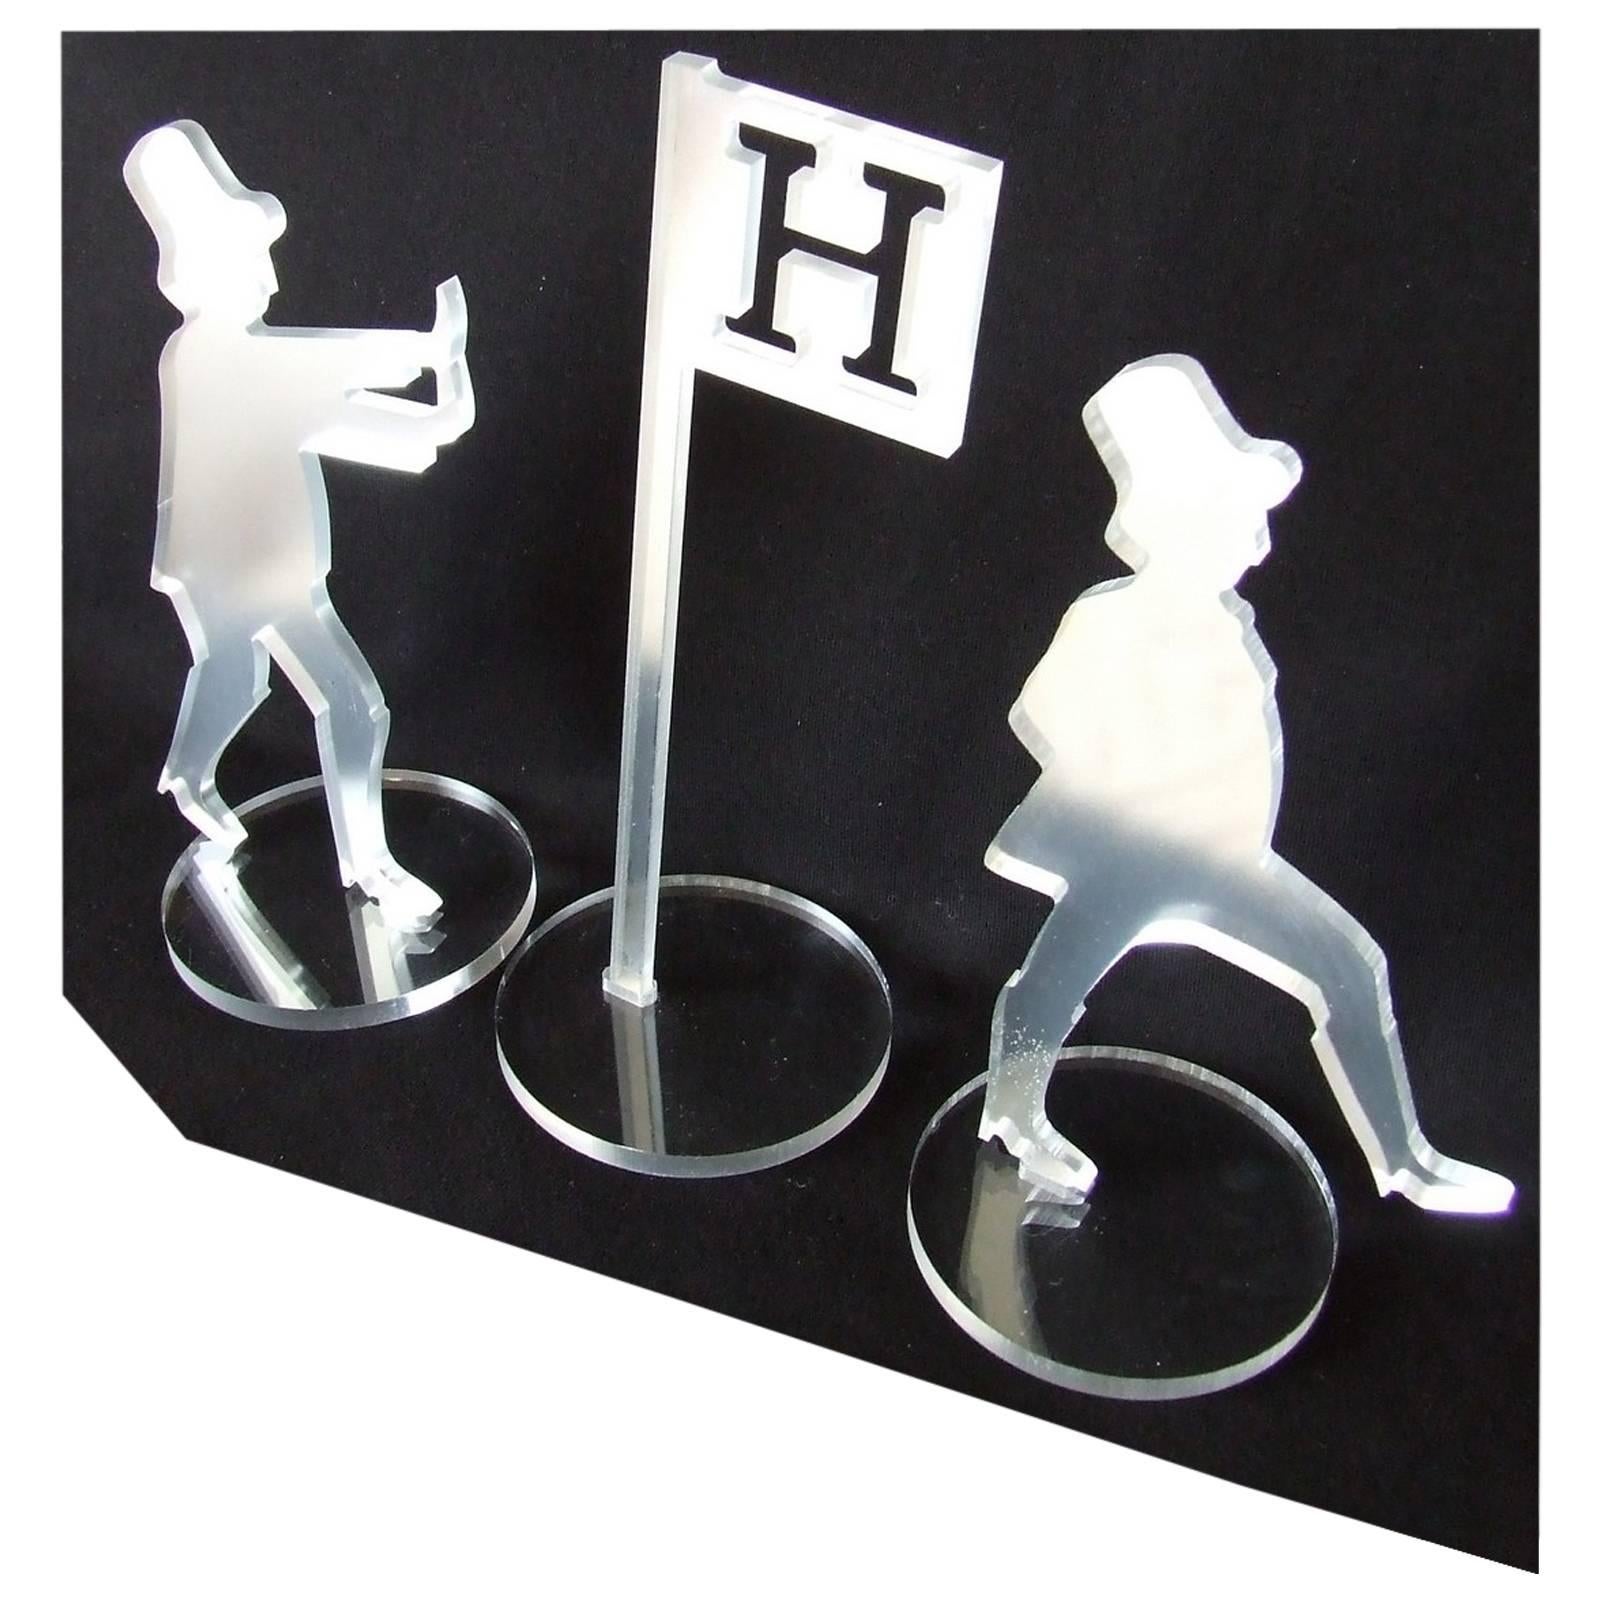 RARE: 3 Figurines used to decorate a Hermès Shop Window 

Made of Plexiglas

Mirror effect (but are not mirrors)

Hooks on the back of the two characters

Settle on round bases in Plexiglas

Characters: around 18 cm Height (7 inches) / 10